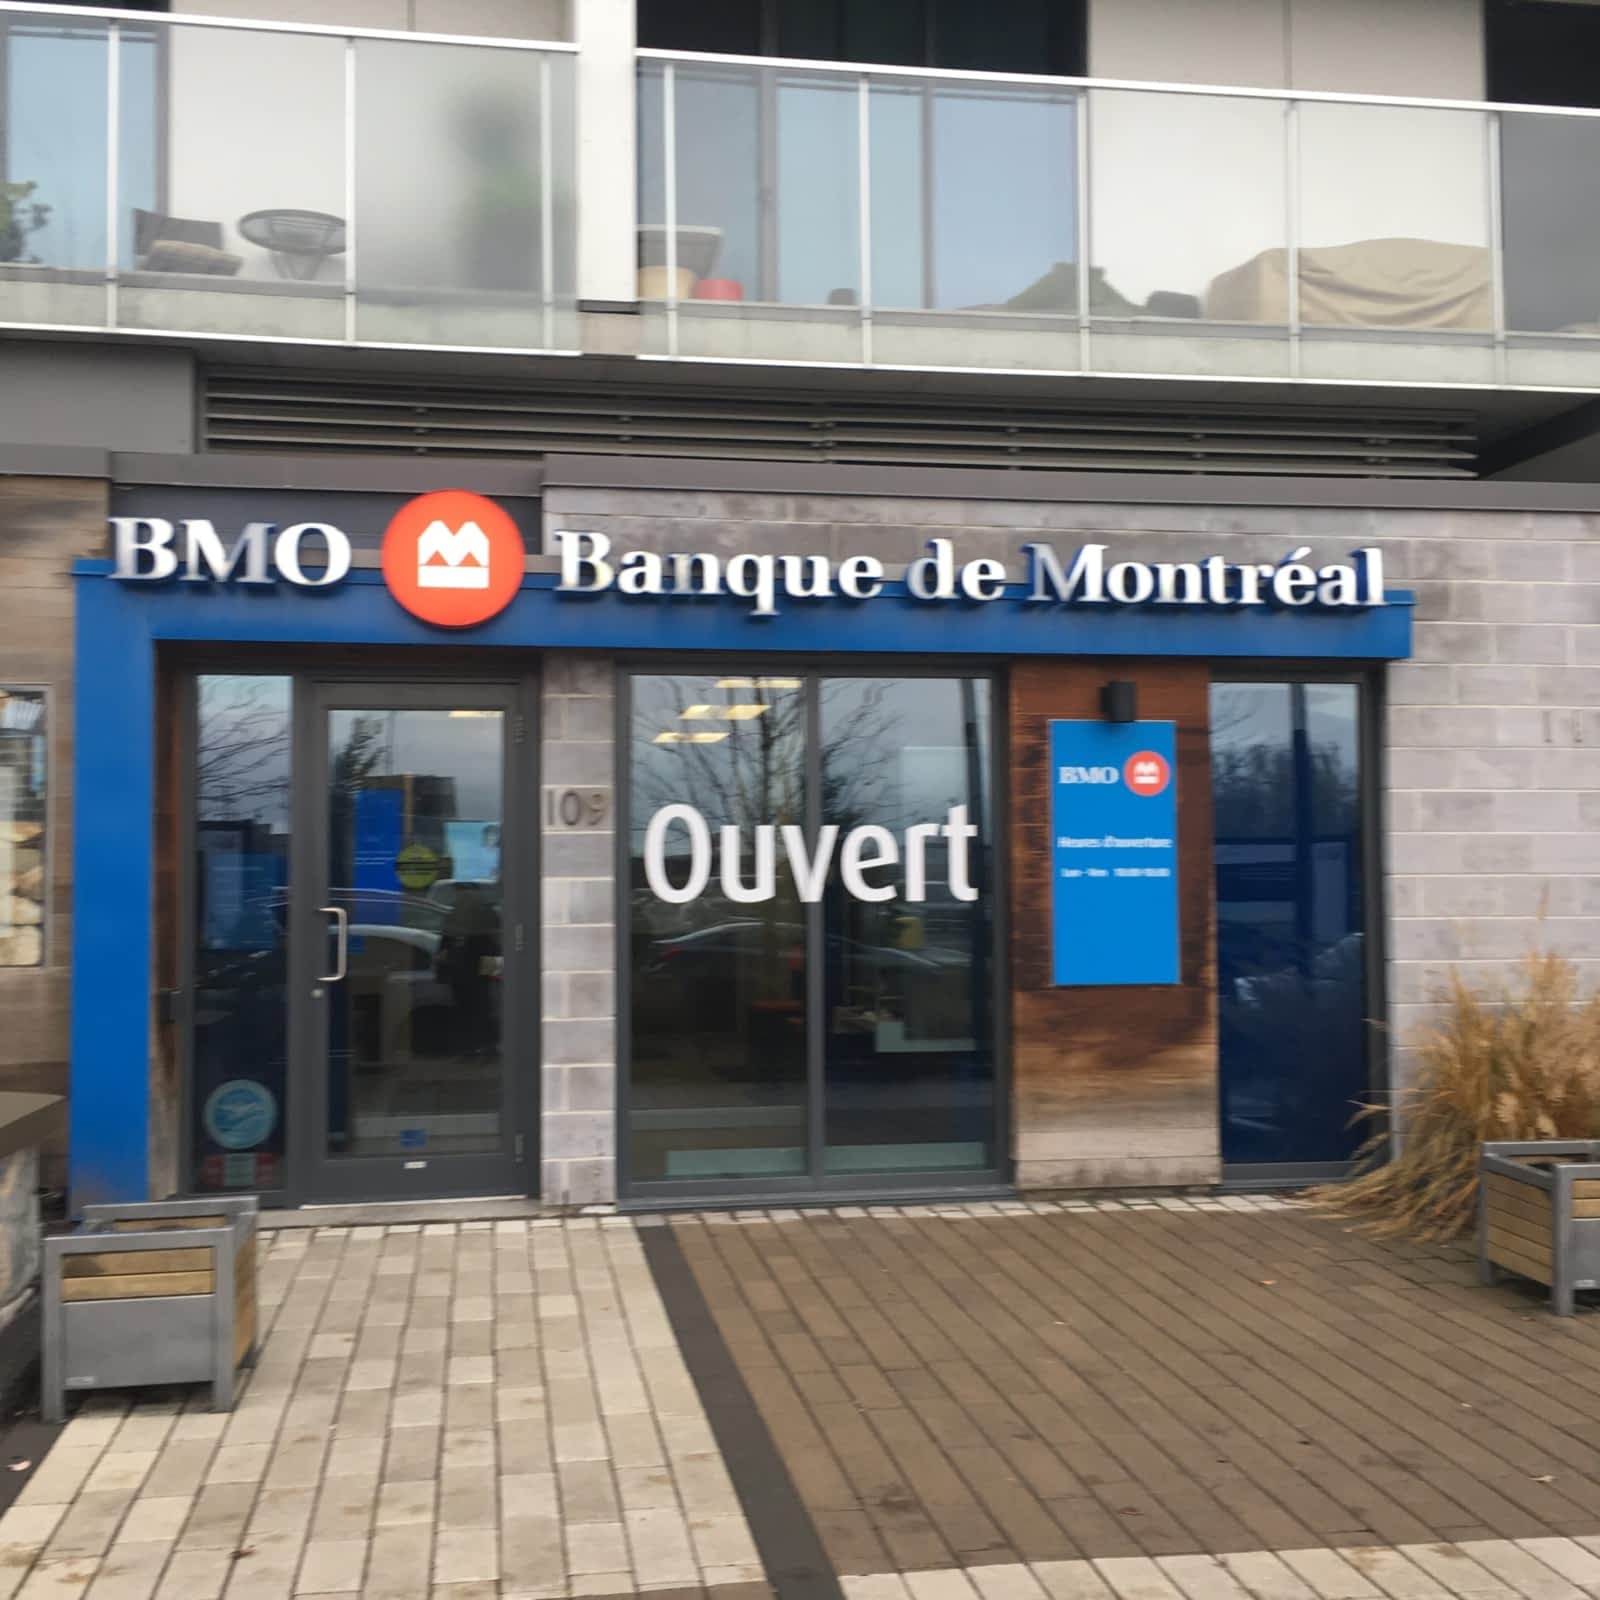 What is the Banque de Montreal?